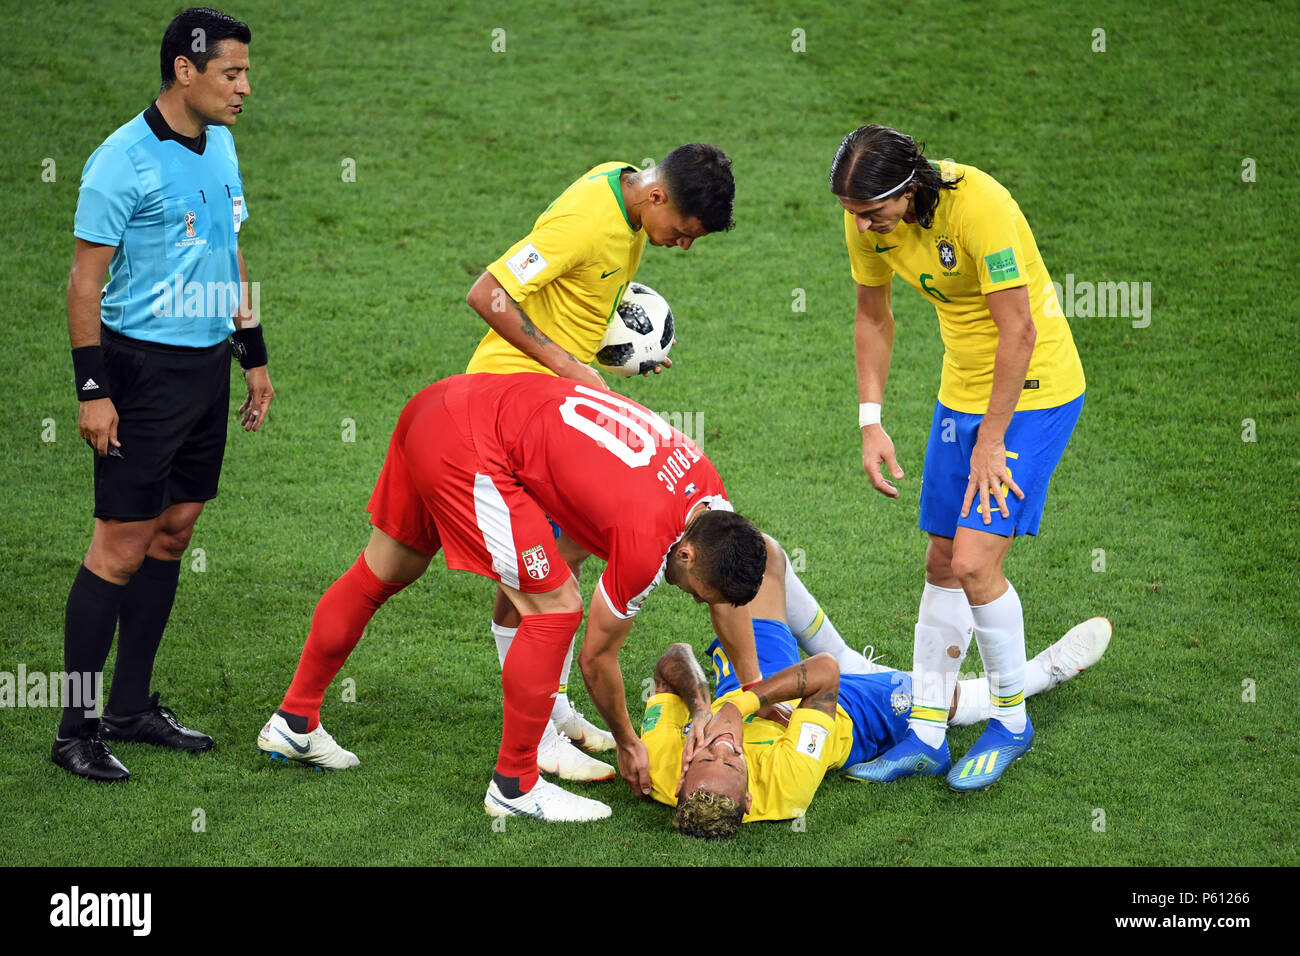 Moscow, Russia. 27th June, 2018. Soccer, World Cup, Serbia vs Brazil, group E, at the Spartak-Stadium. Brazil's Neymar is on the ground, as Serbia's Dusan Tadic bends over him, next to Iranian referee Alireza Faghani (l). Credit: Federico Gambarini/dpa/Alamy Live News Stock Photo